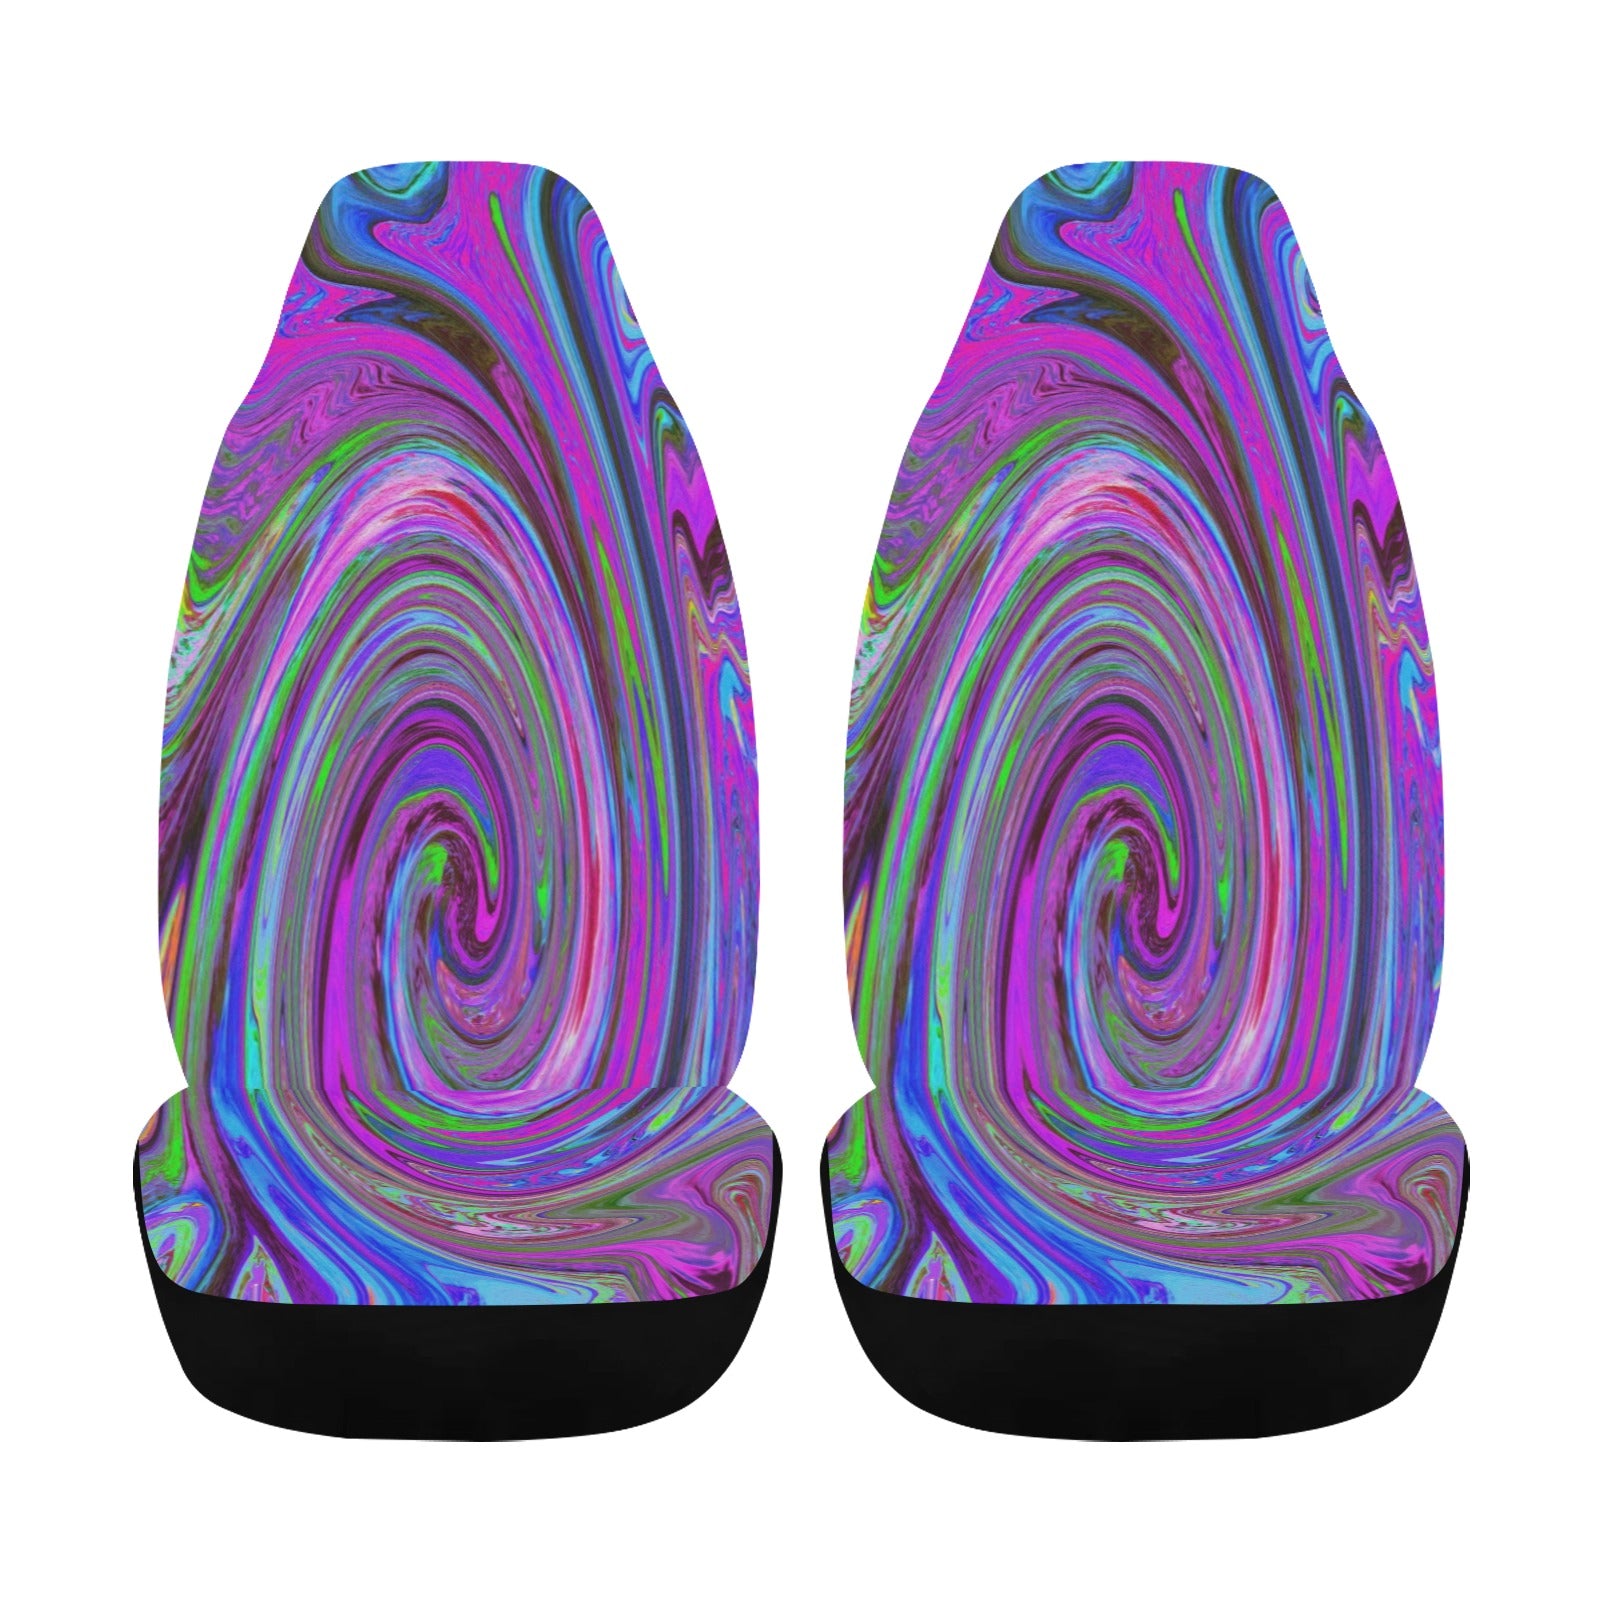 Car Seat Covers, Colorful Magenta Swirl Retro Abstract Design